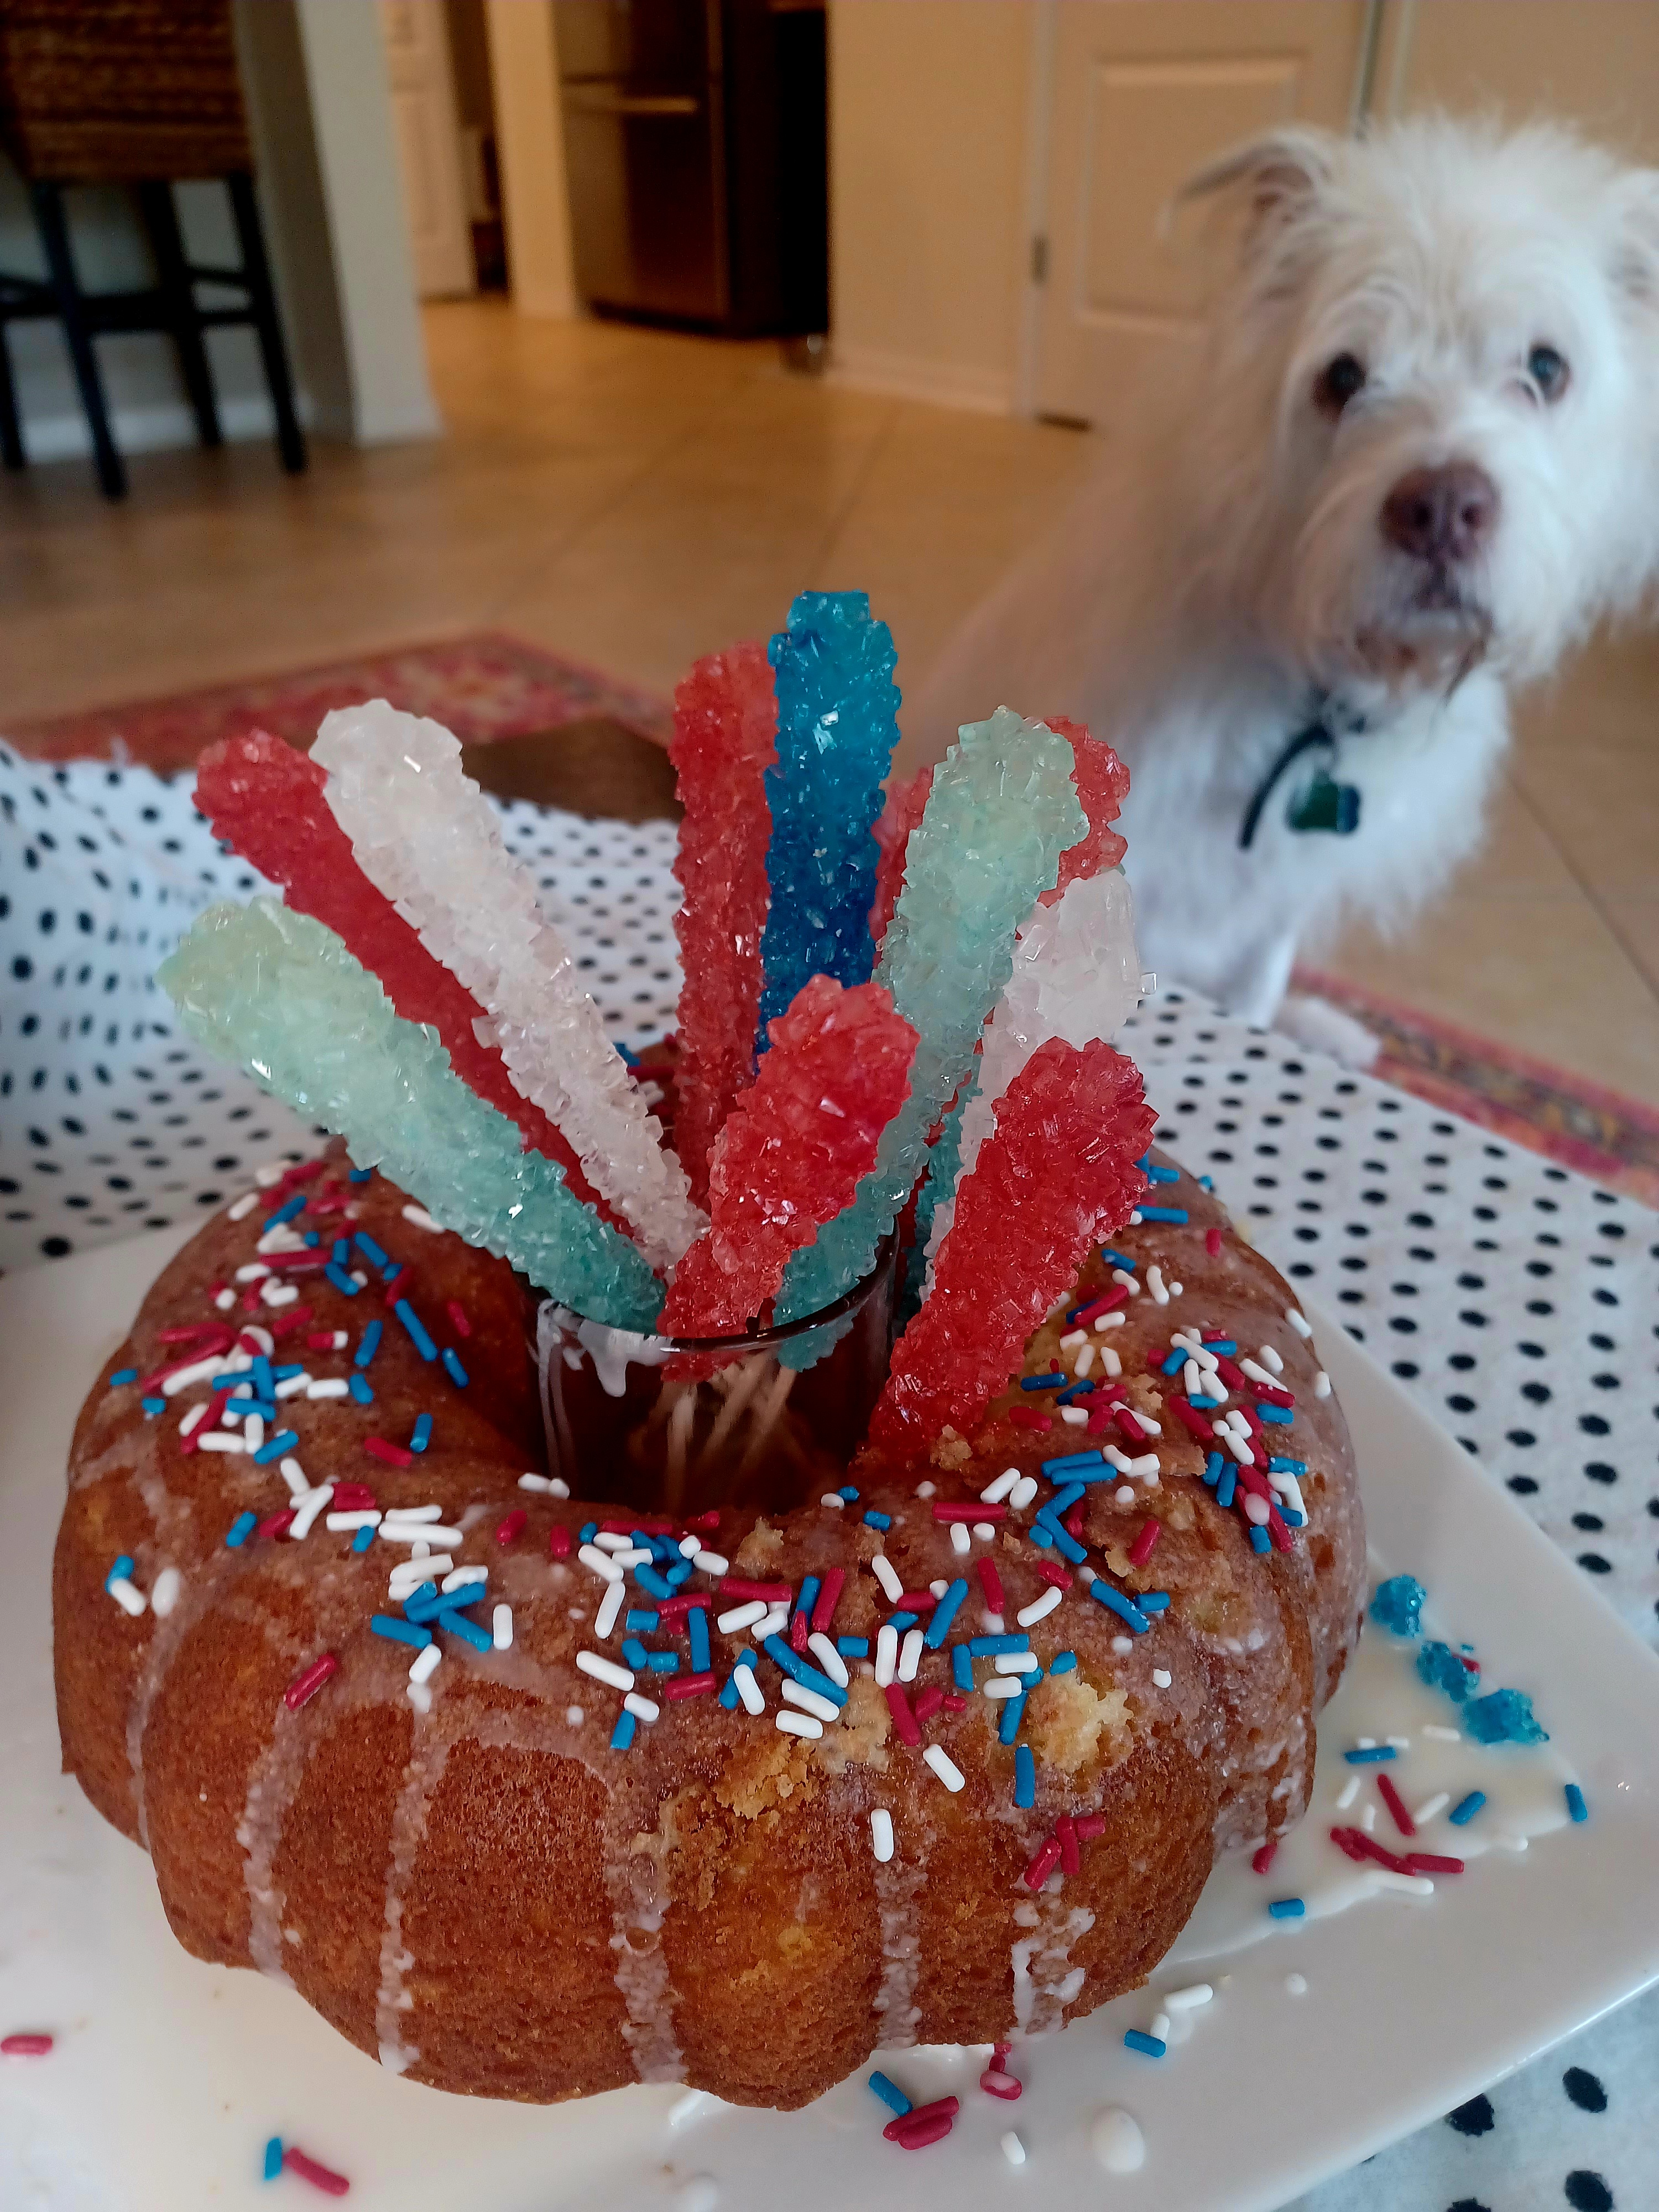 My dog, simultaneously judging me while hoping he can have some. If you need the glass, too, you could always make taking one a part of the fun! (Amy Drew Thompson/Orlando Sentinel)